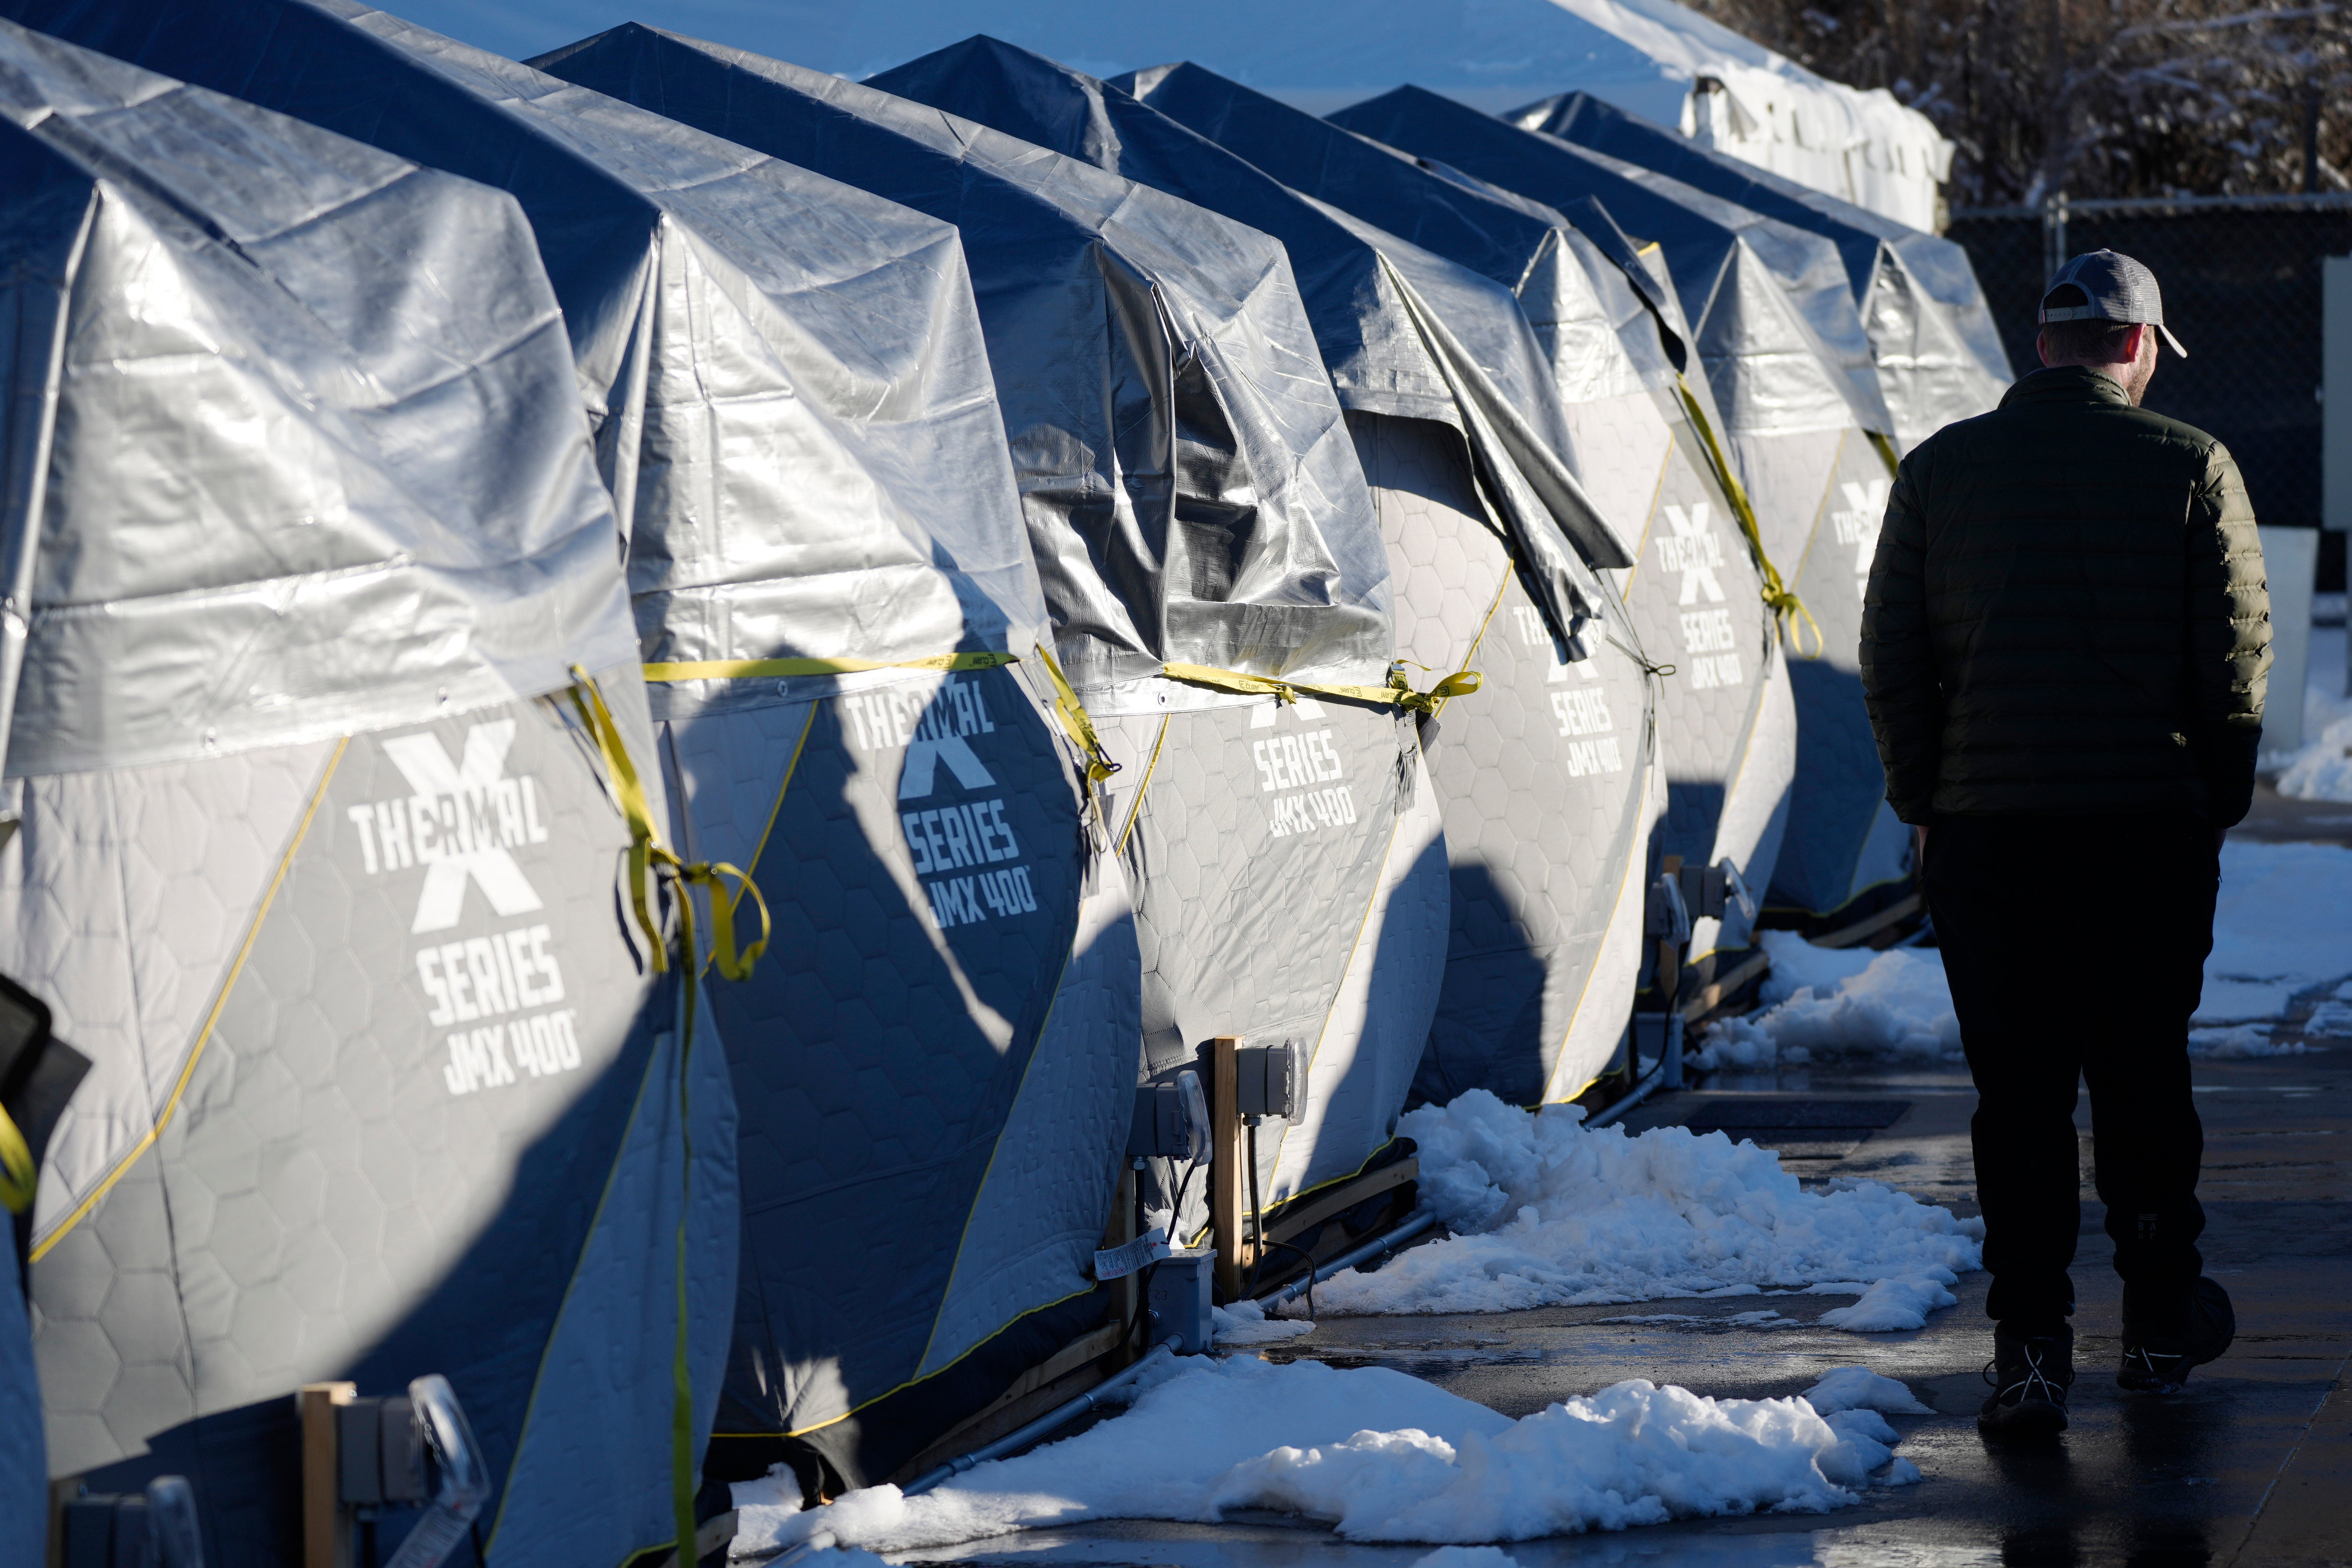 Ice fishing tents converted to housing for the homeless in Colorado